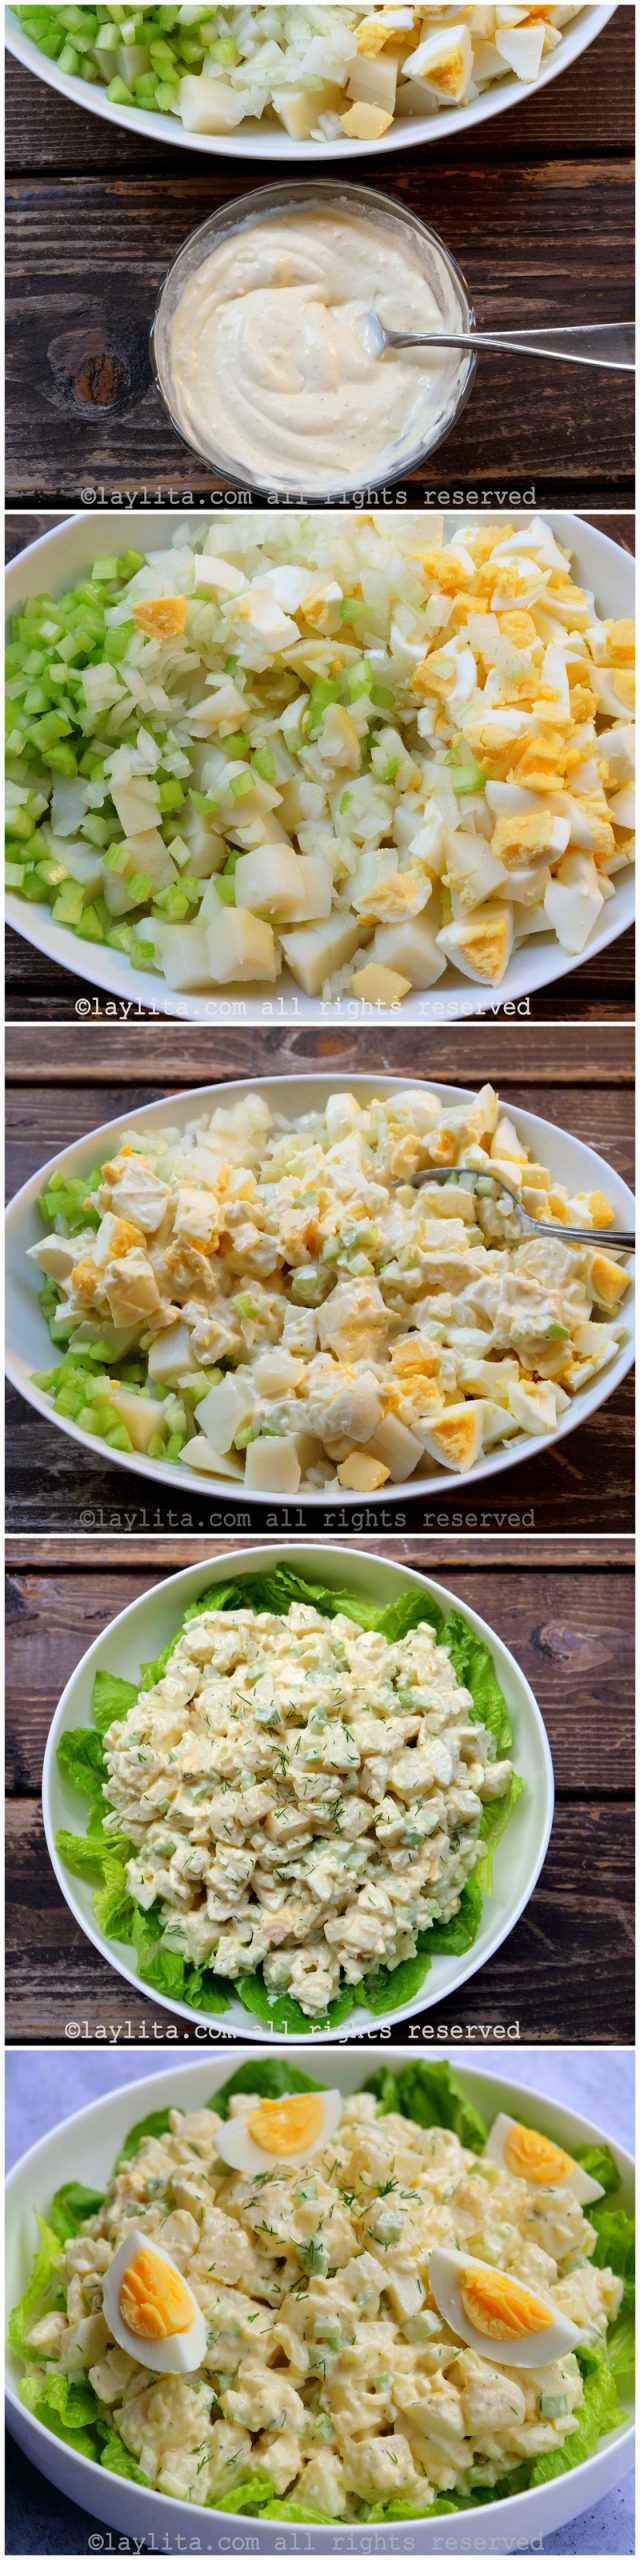 Step by step preparation for potato and egg salad recipe